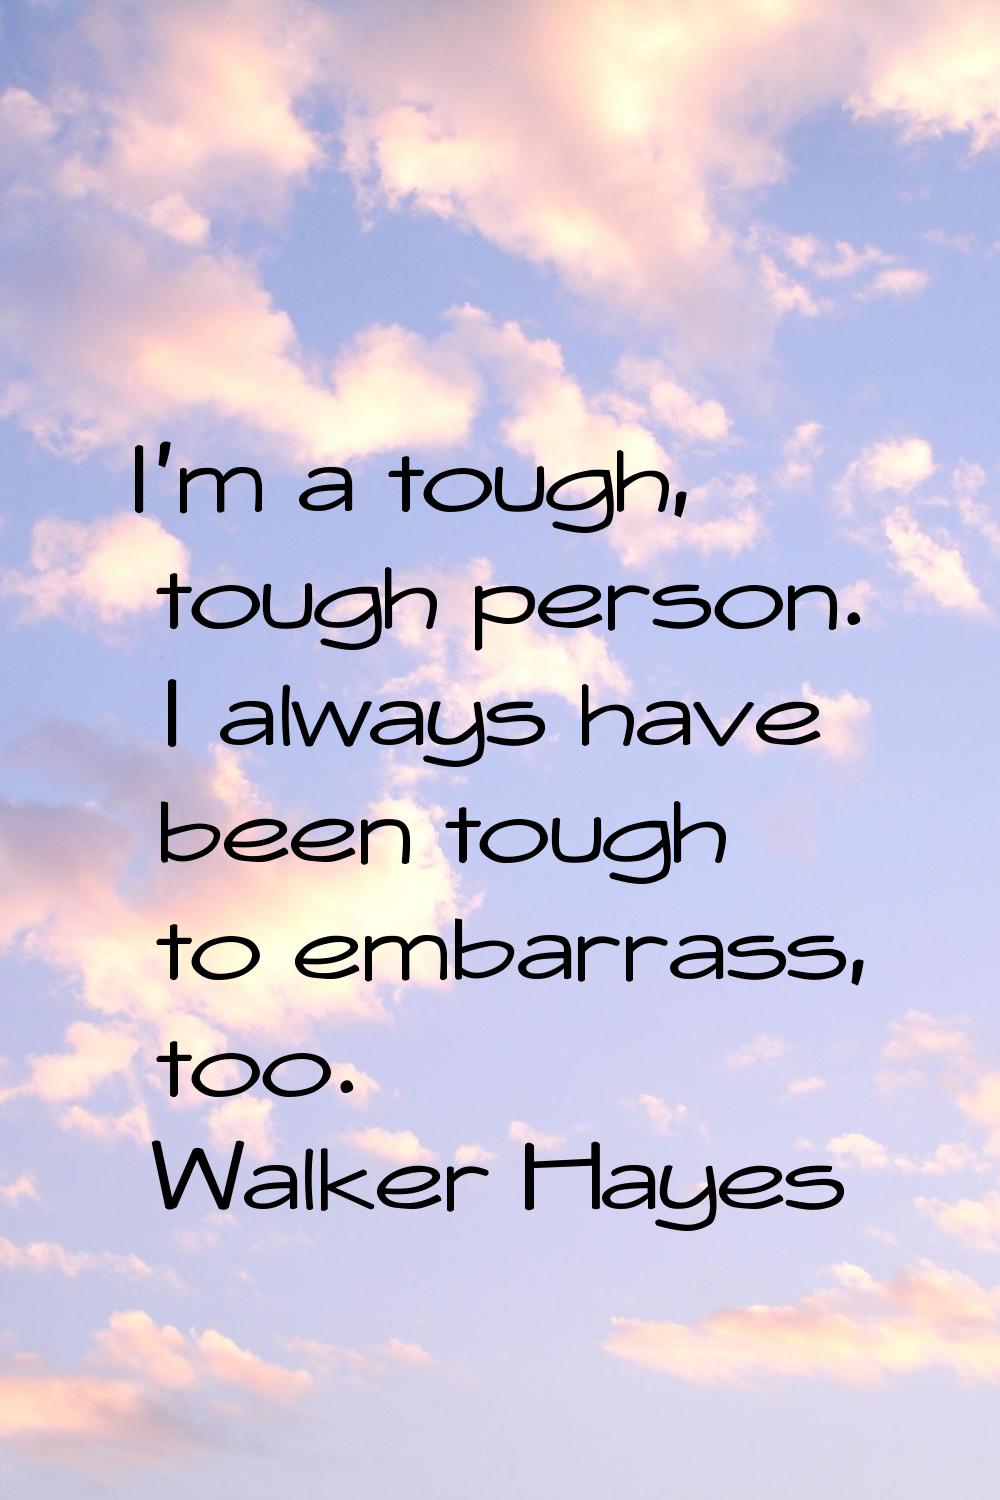 I'm a tough, tough person. I always have been tough to embarrass, too.